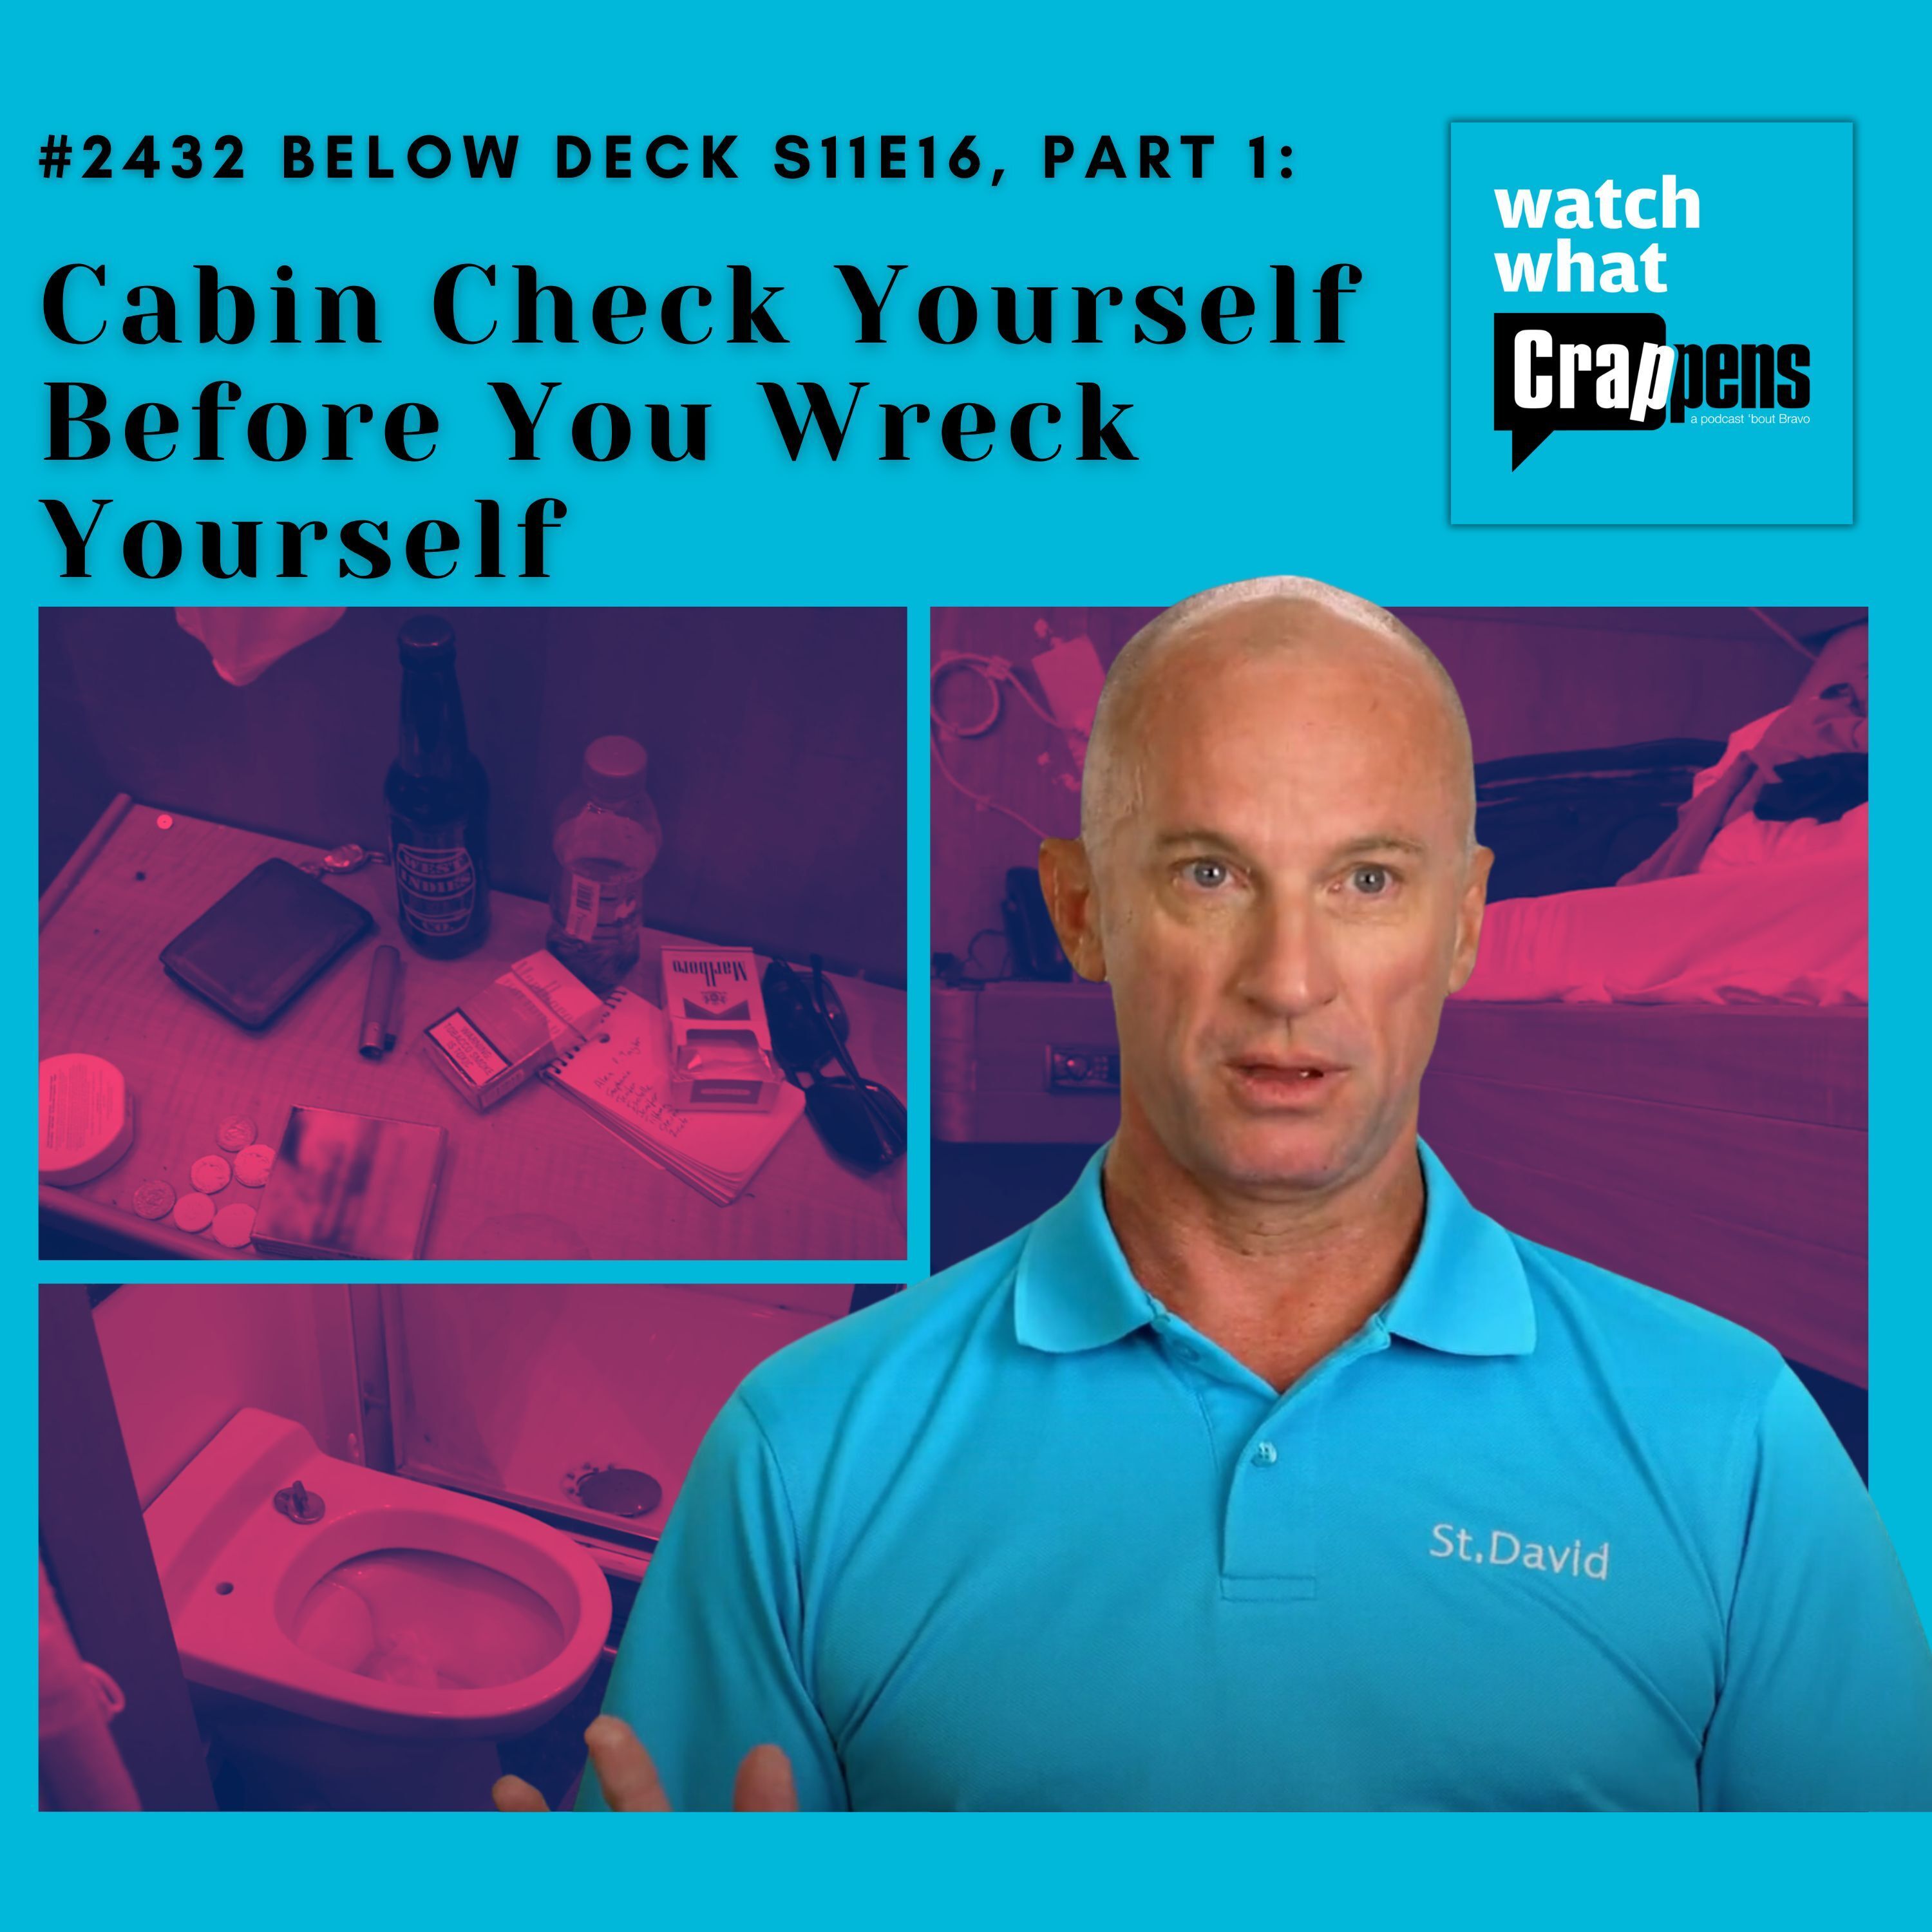 #2432 Below Deck  S11E16, part 1: Cabin Check Yourself Before You Wreck Yourself